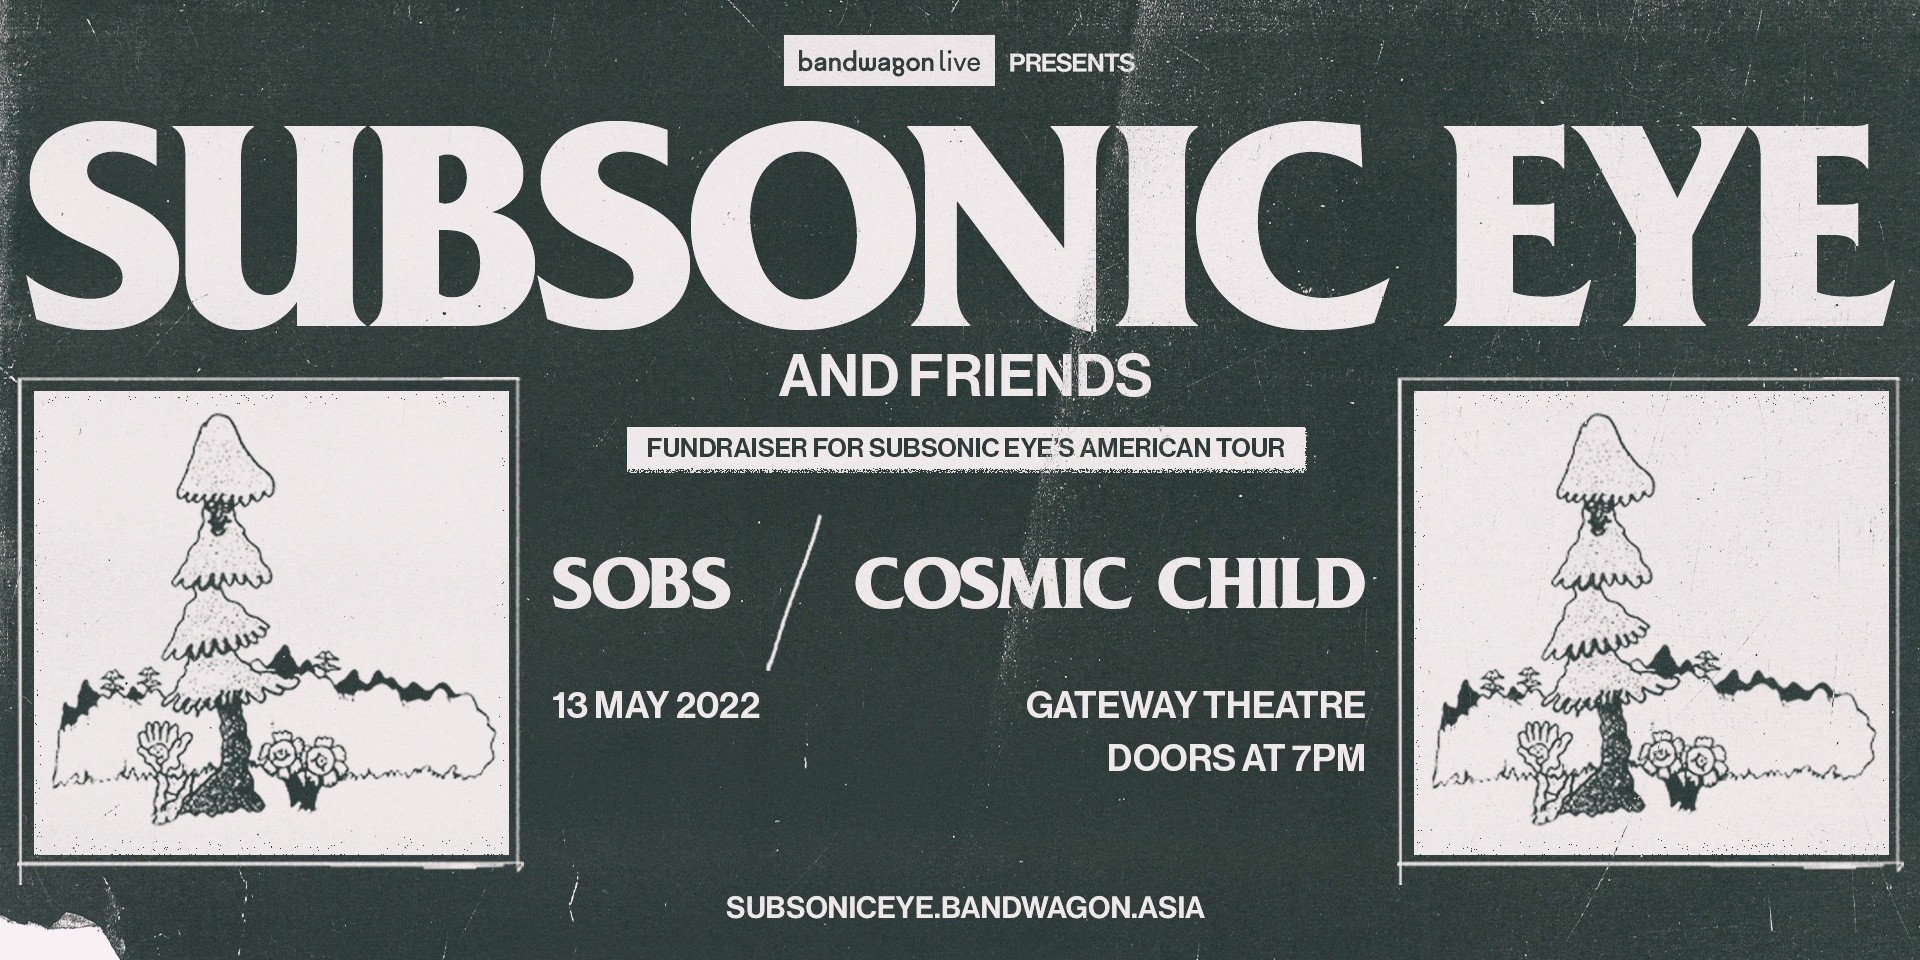 Subsonic Eye to hold fundraiser concert in Singapore with Sobs and Cosmic Child, here's how to get tickets to the show